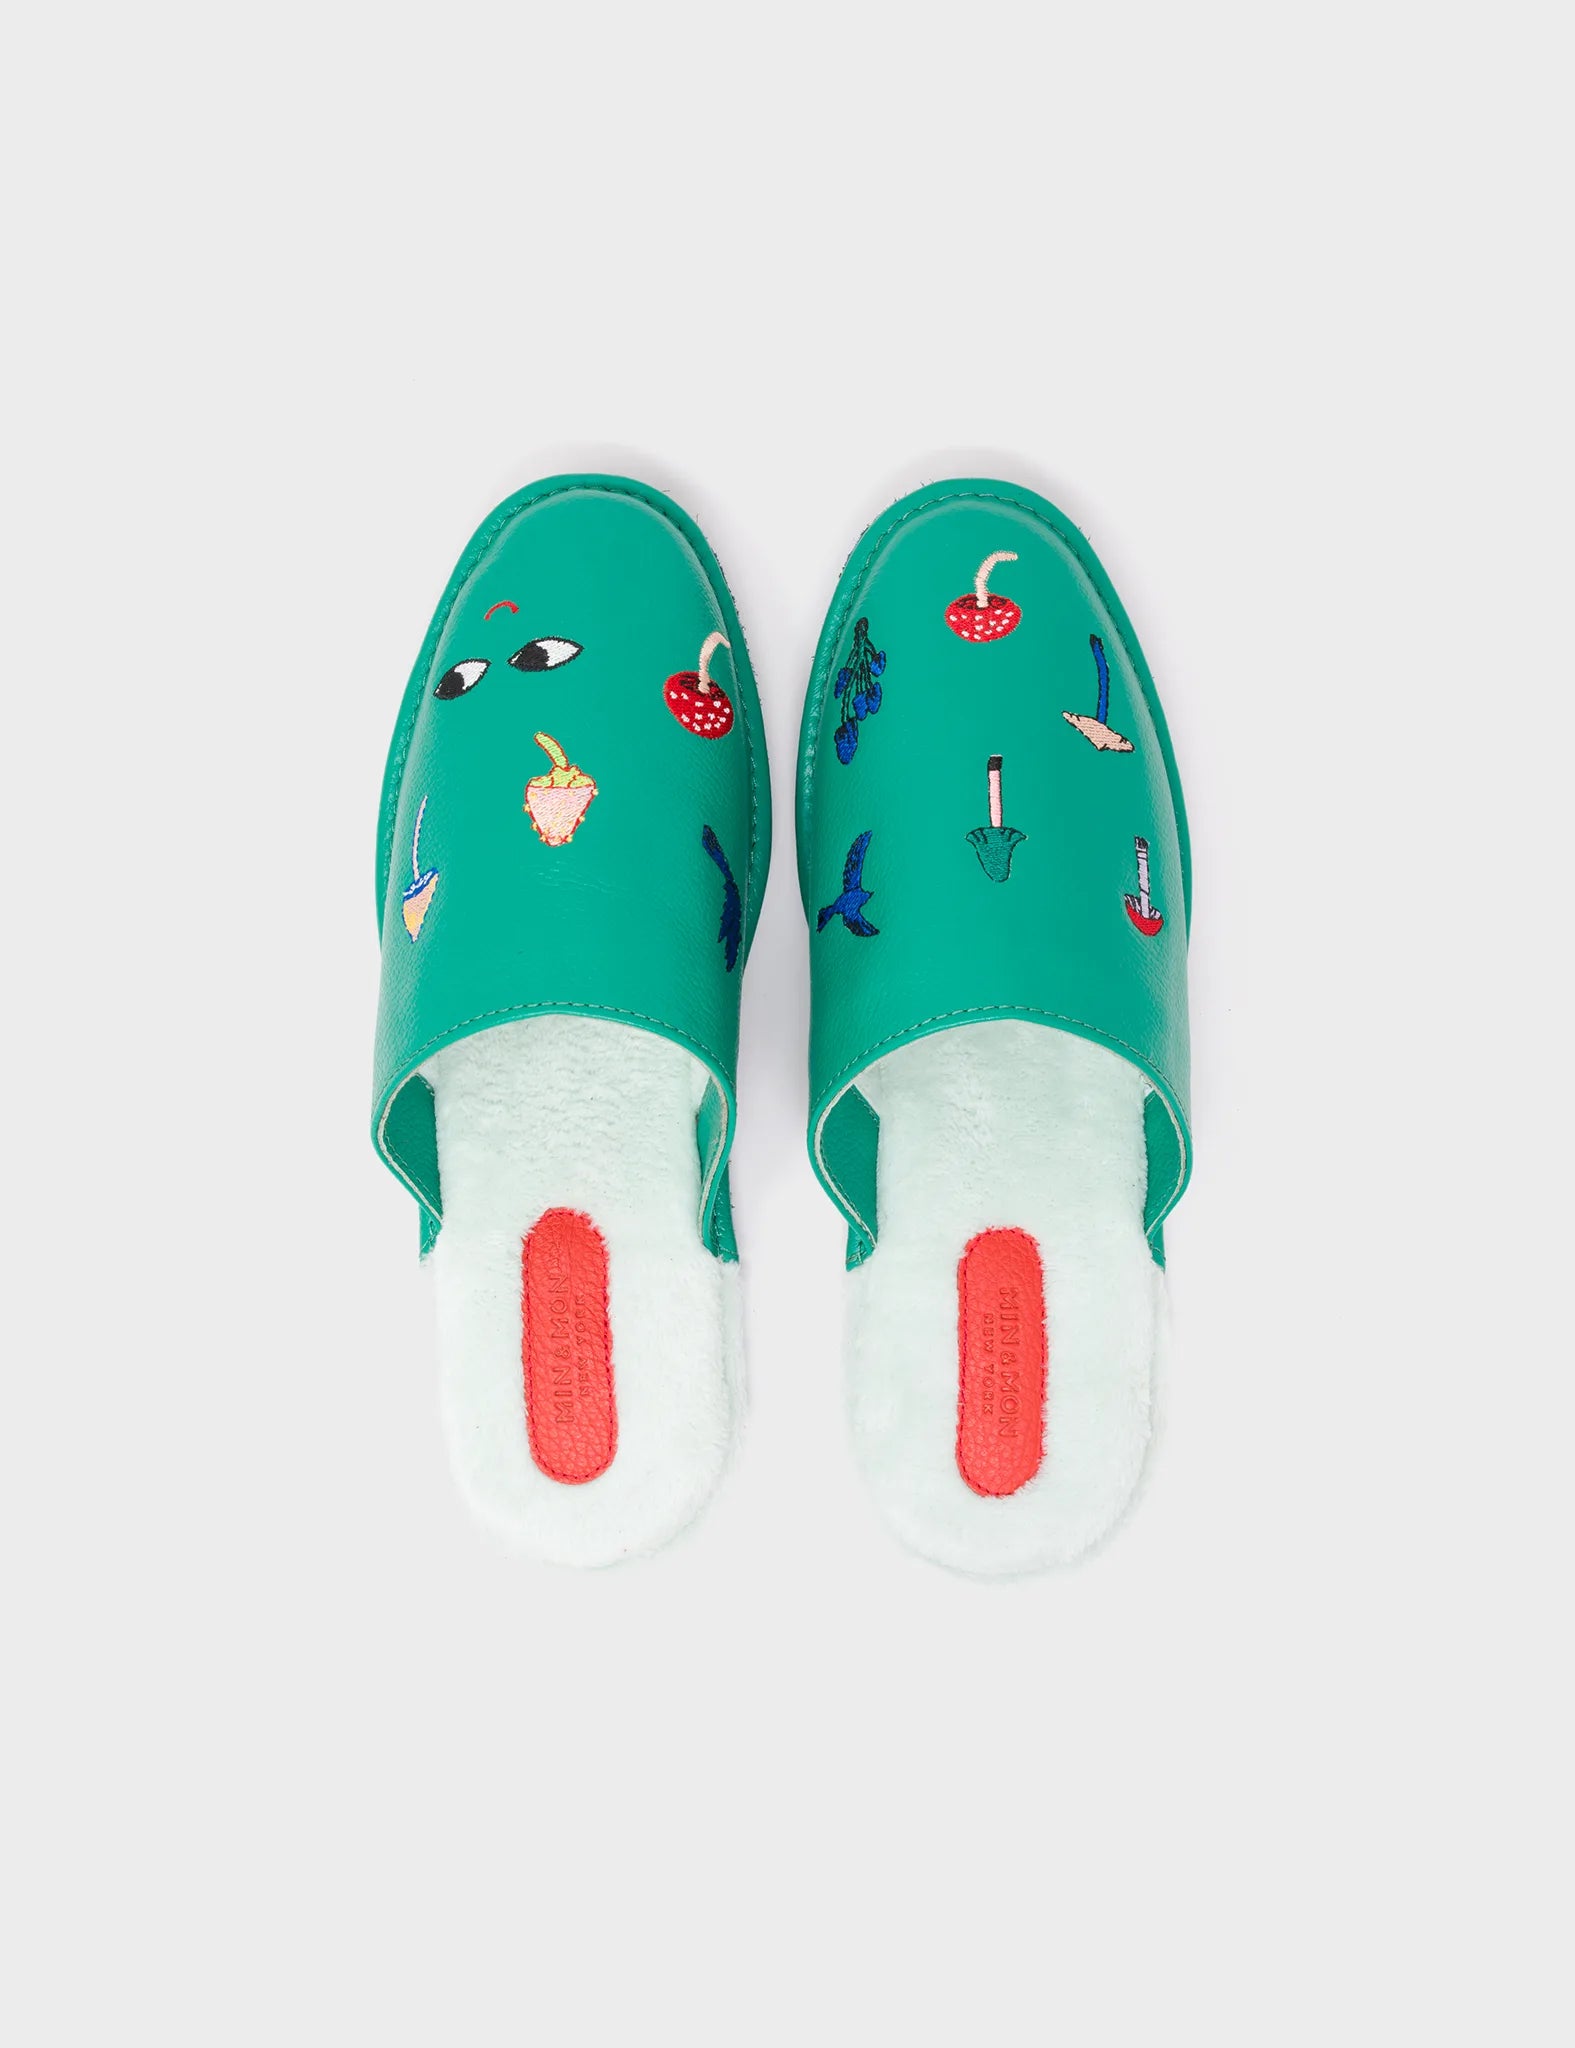 Deep Green Leather Slippers - Fungi, Birds & Smiley Face Embroidery - Top